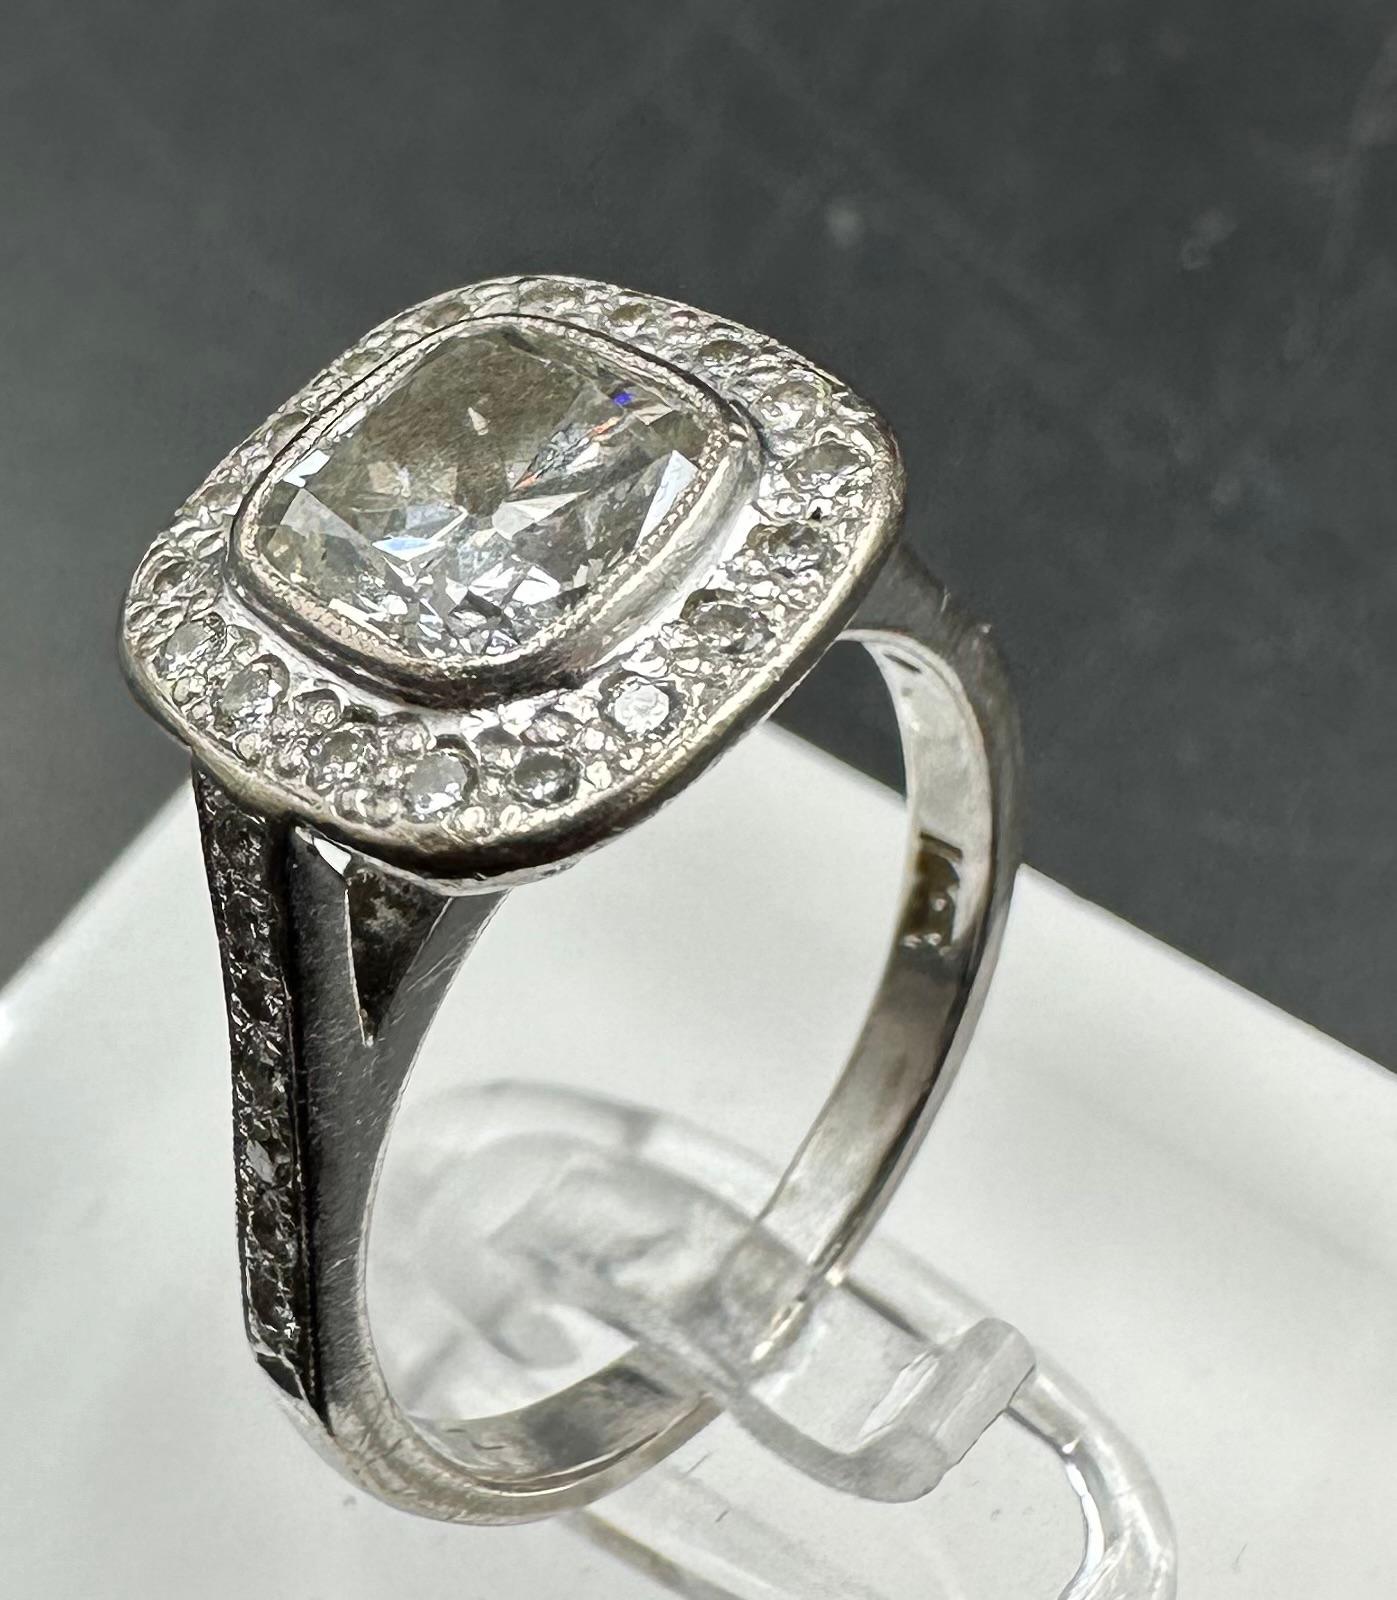 An 18ct white gold diamond ring with central stone of approximately 1.2ct and approximately 0.3ct